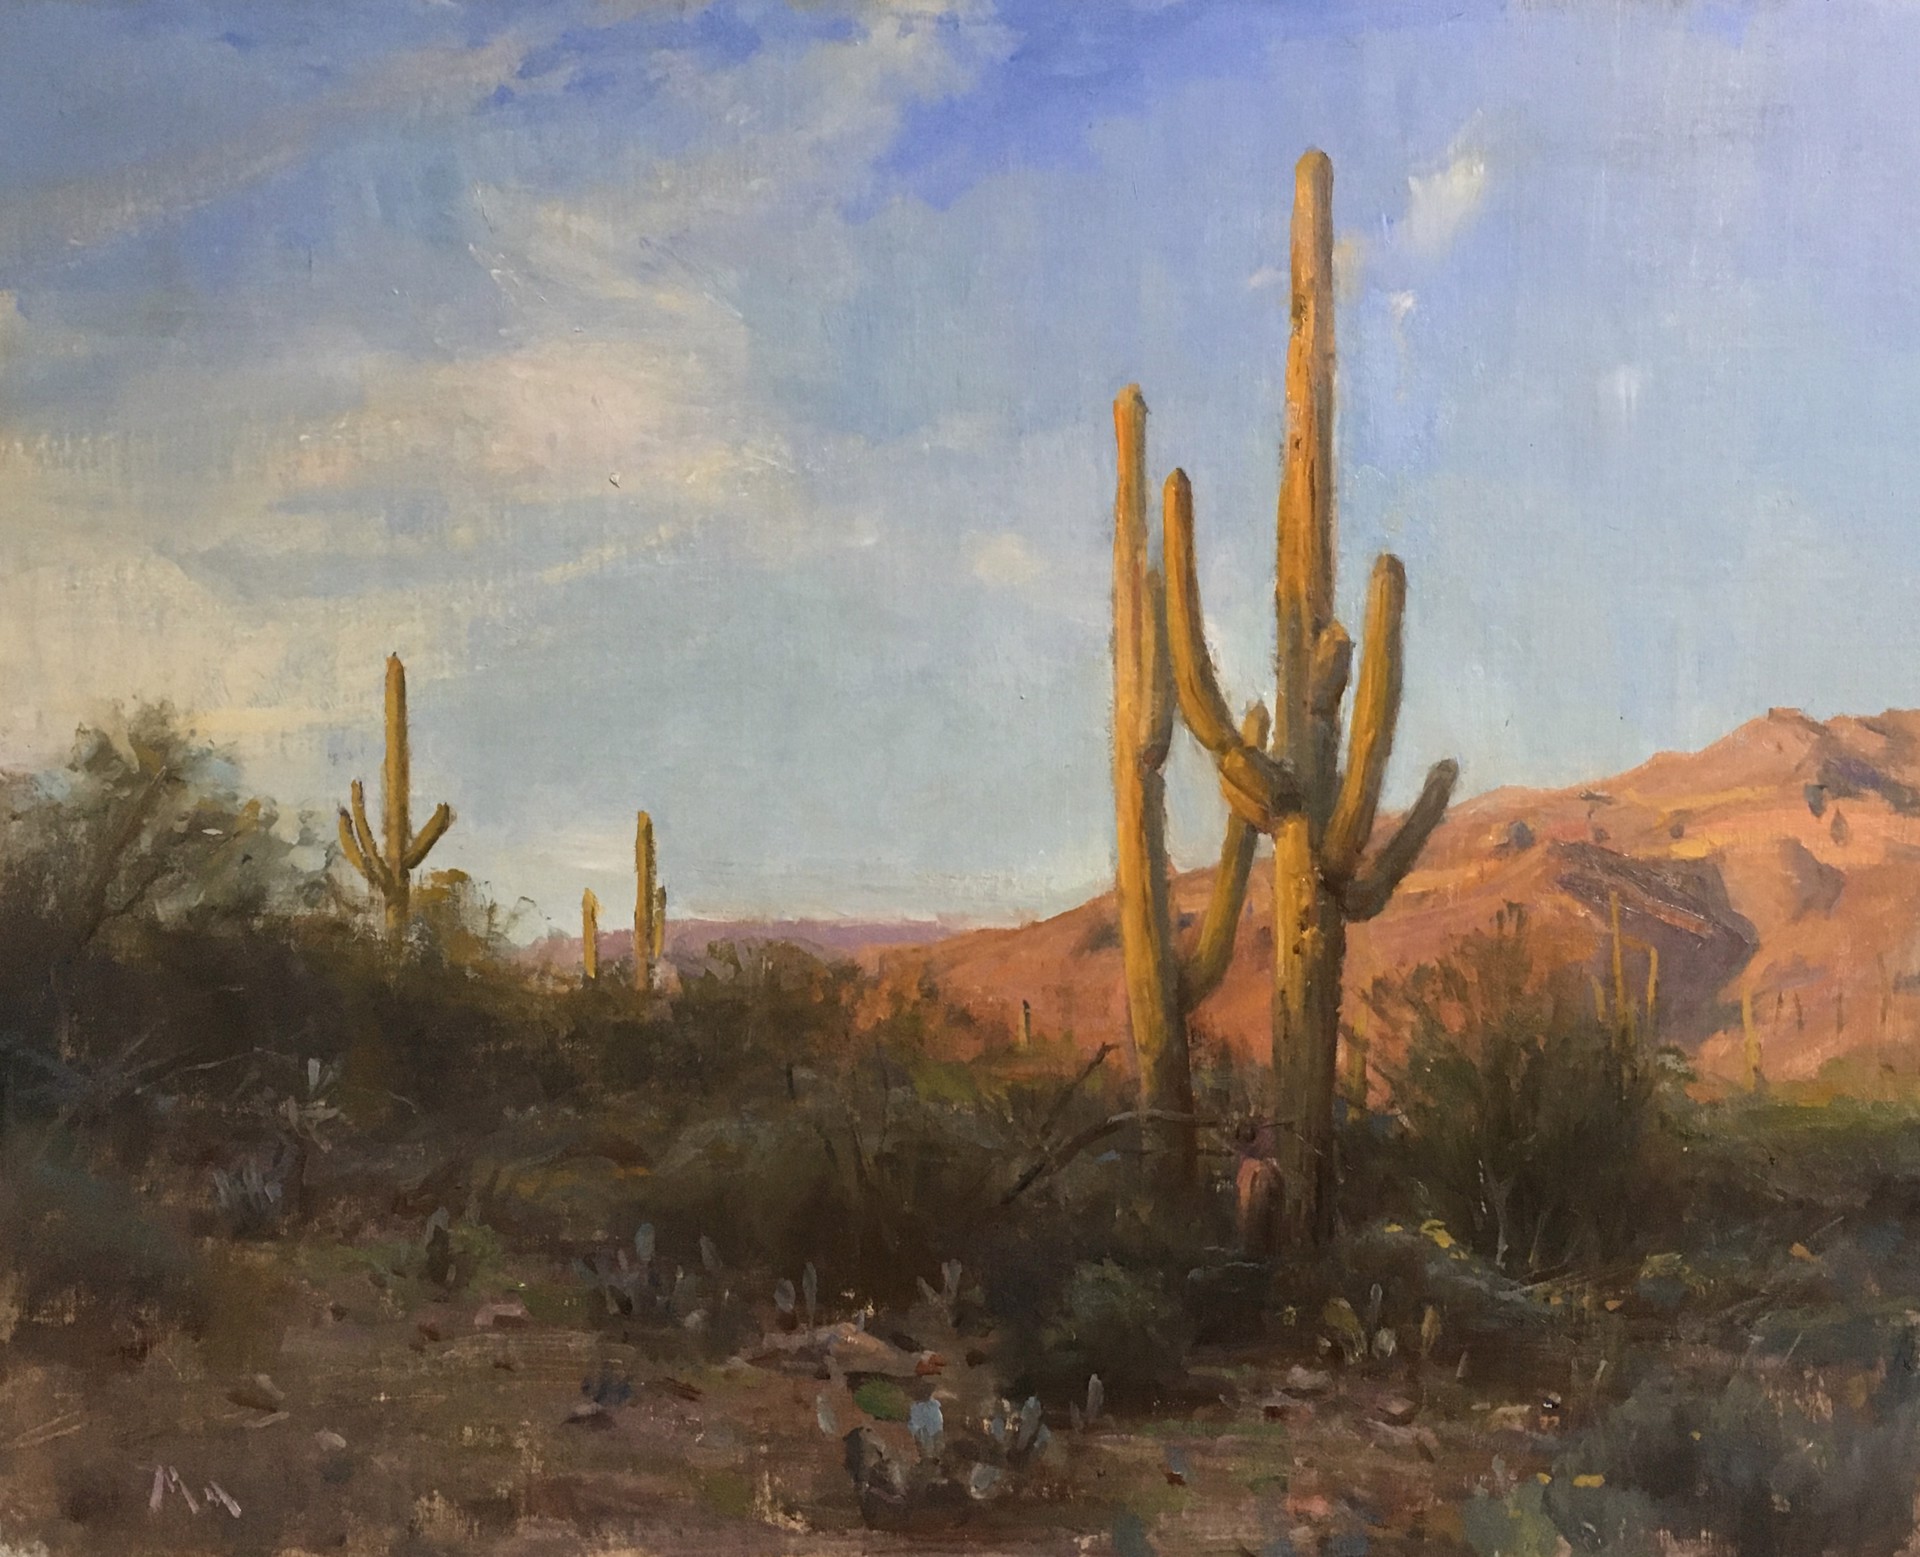 Evening in Sonoran Desert by Kyle Ma